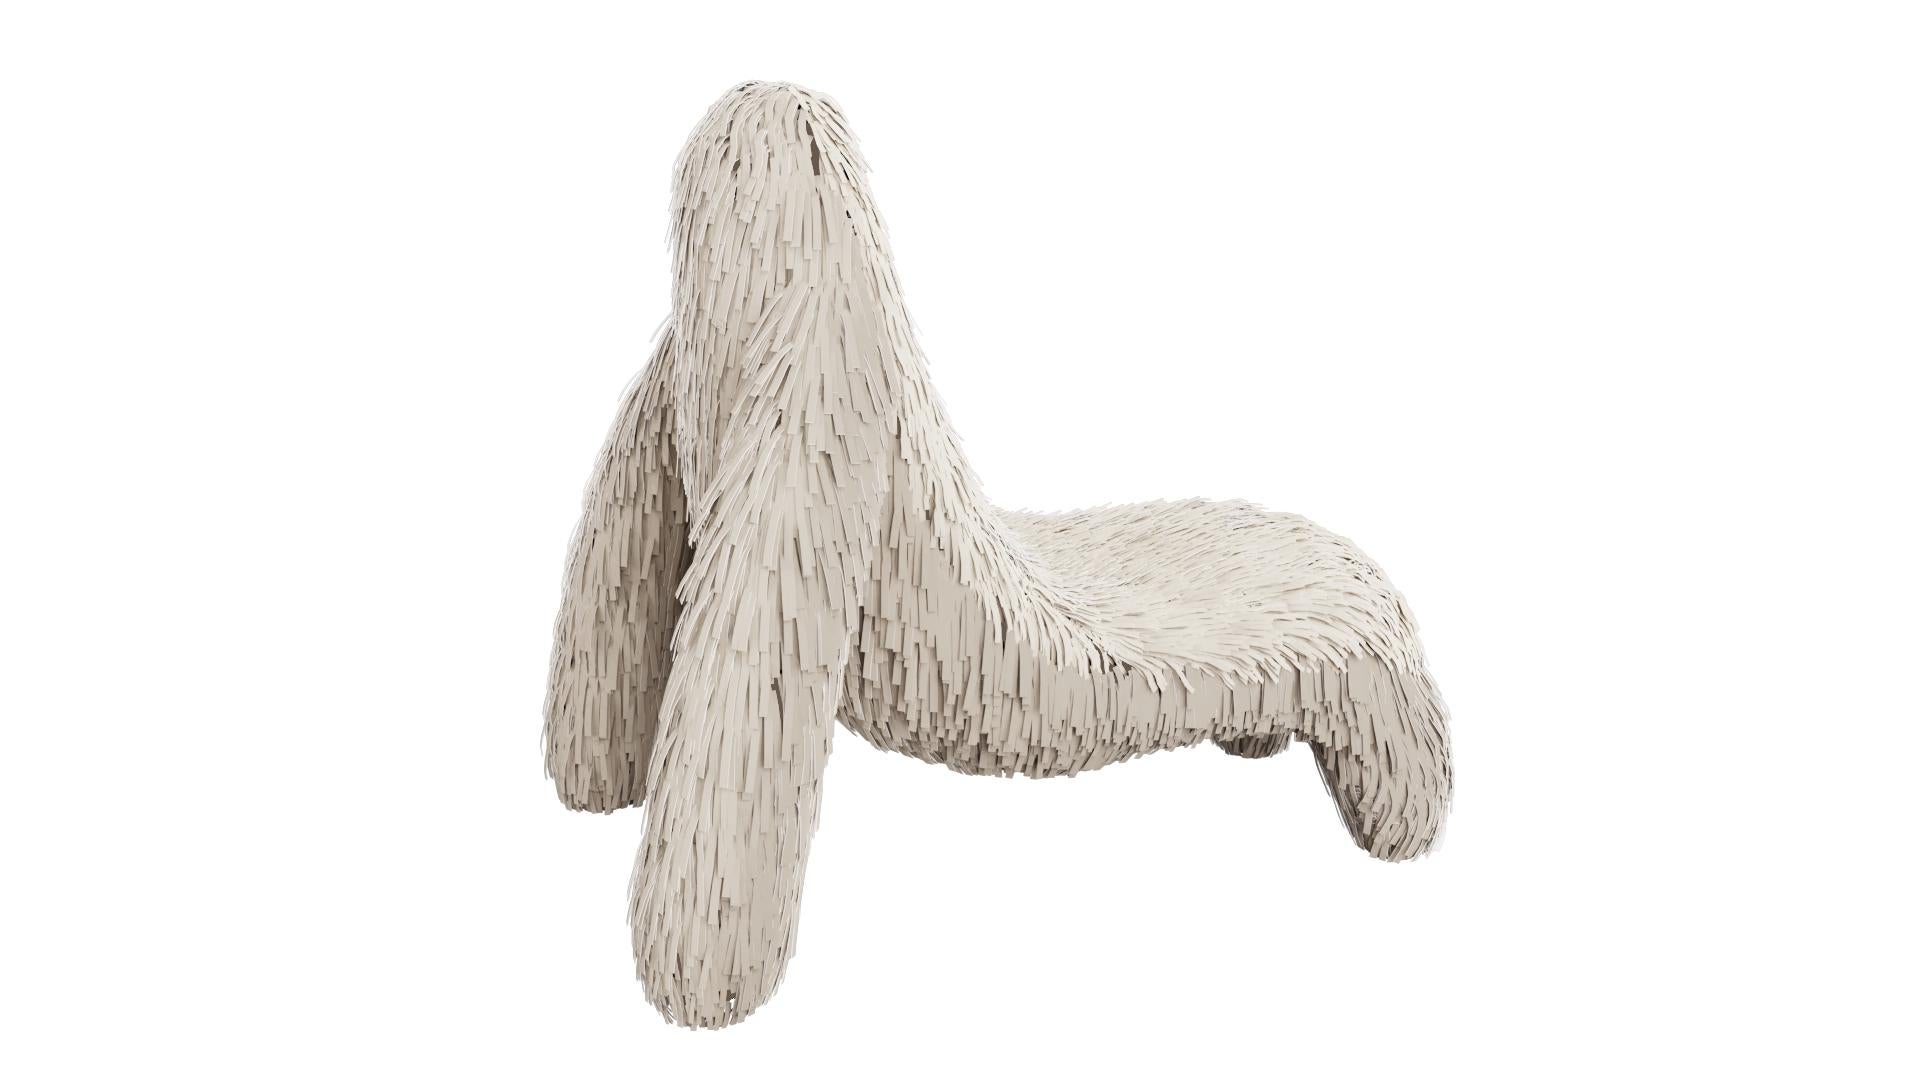 Gorilla chair with real off white leather by Marcantonio is an ape shaped seat with a rich off white leather covering. A lounge chair with a fantastic, unique shape.

For his debut creations, Marcantonio introduced “Vegetal Animal”, a concept that